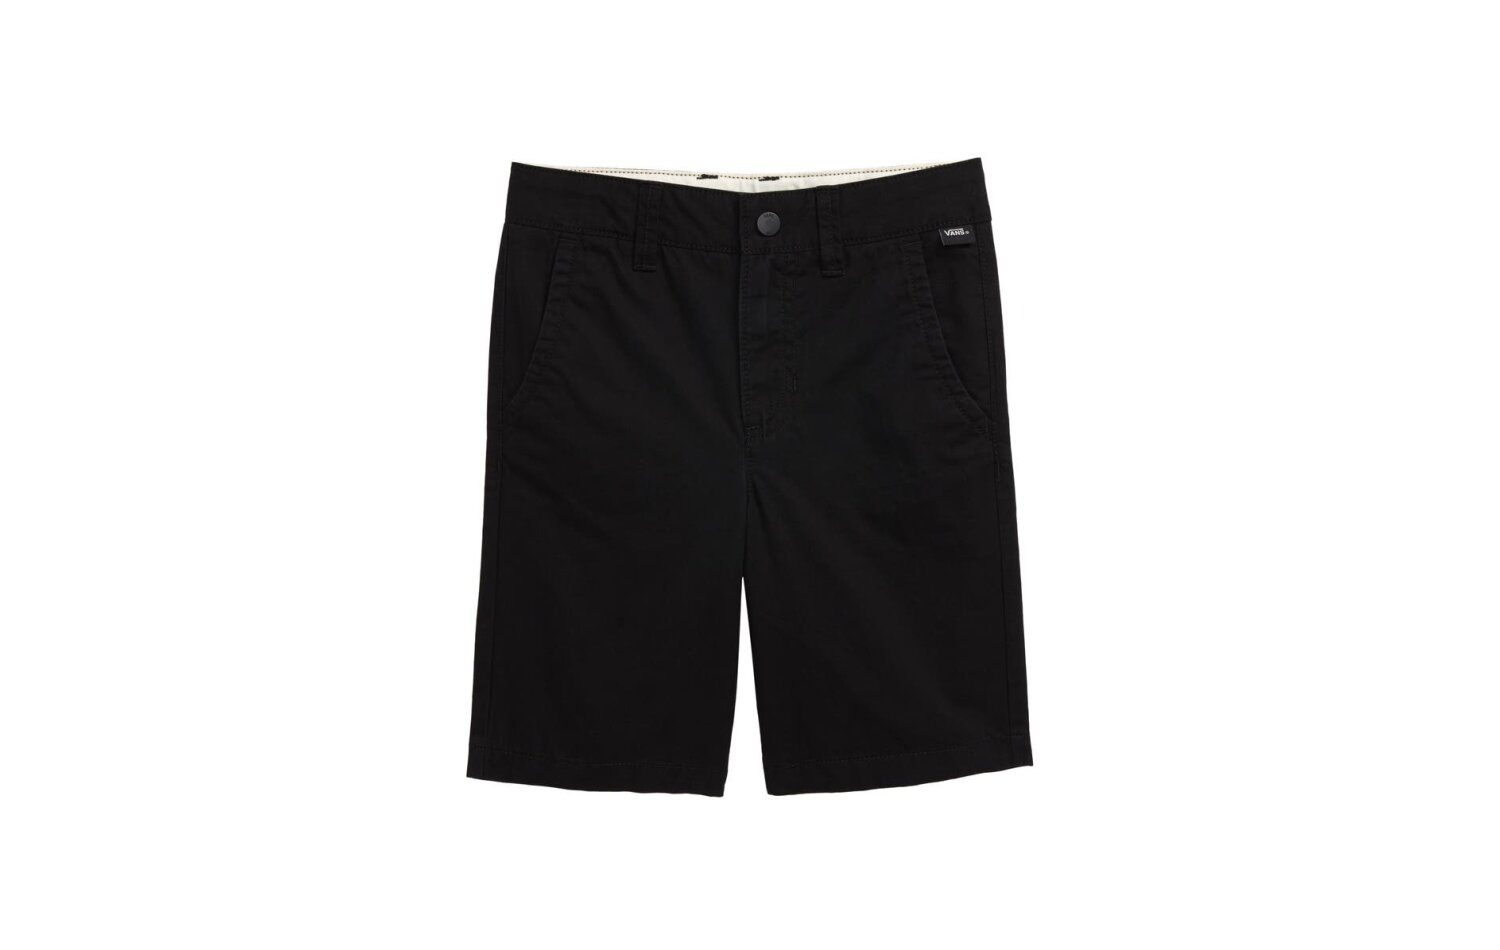 Vans Authentic Chino Relaxed Short (VN0A5FJXBLK)